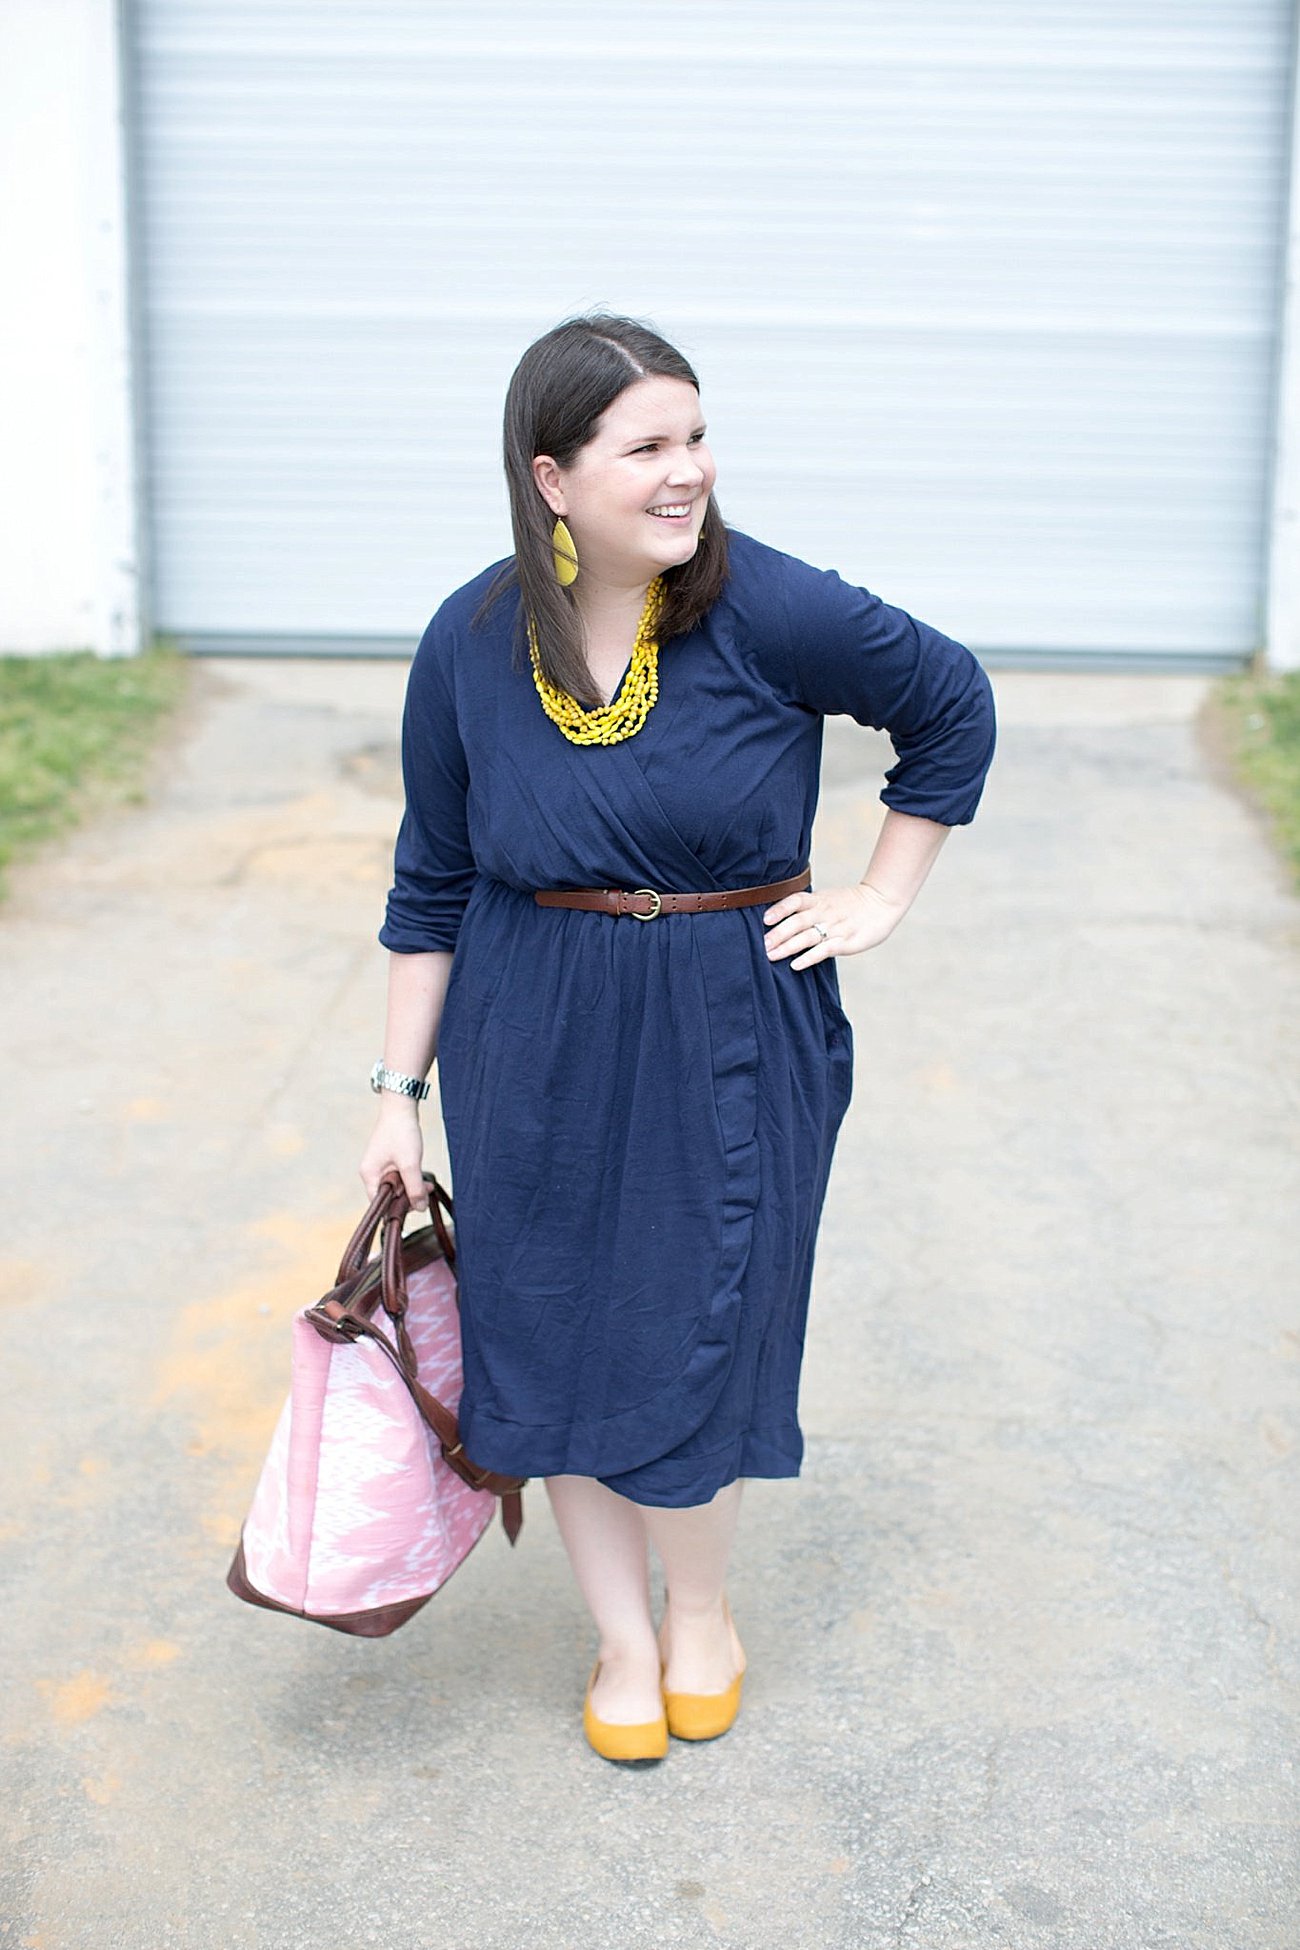 Tonle Design "Tess" Wrap Dress, Tribe Alive Weekender Bag, Sela Designs necklace, Nickel and Suede earrings, The Root Collective Shoes | North Carolina Fashion & Style Blogger | Ethical and Fair Trade Fashion (9)